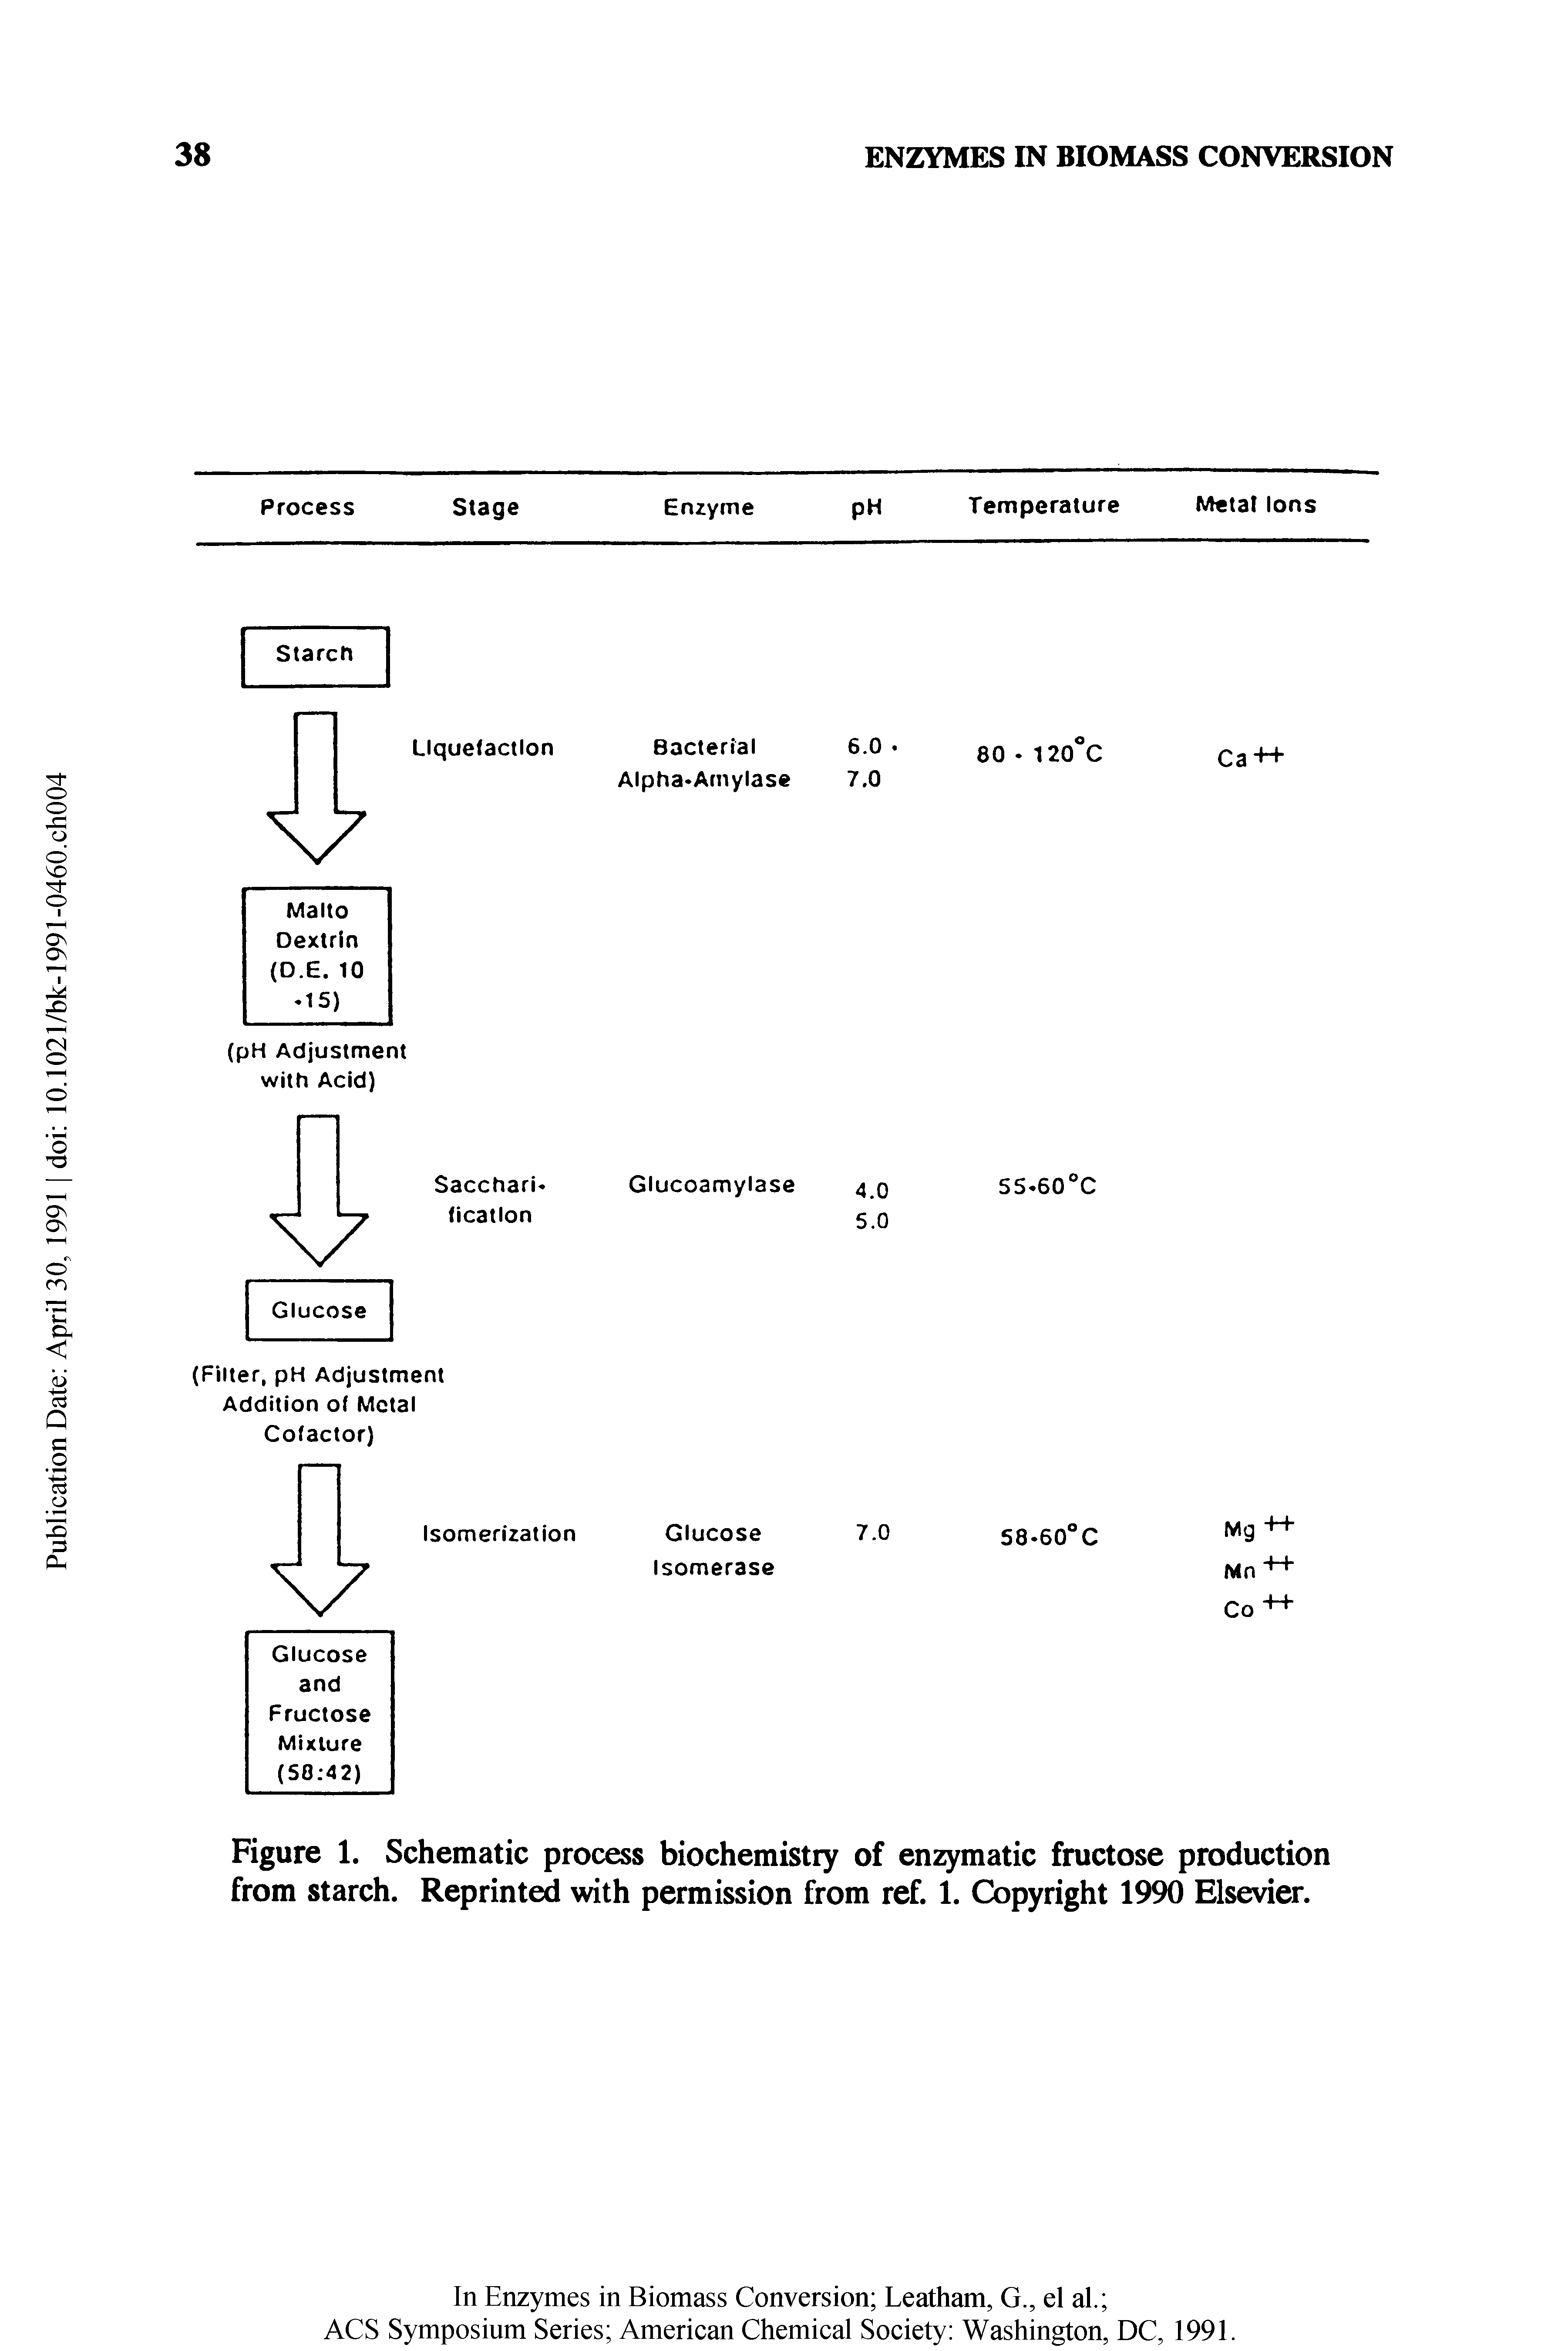 Figure 1. Schematic process biochemistry of enzymatic fructose production from starch. Reprinted with permission from ref. 1. Copyright 1990 Elsevier.